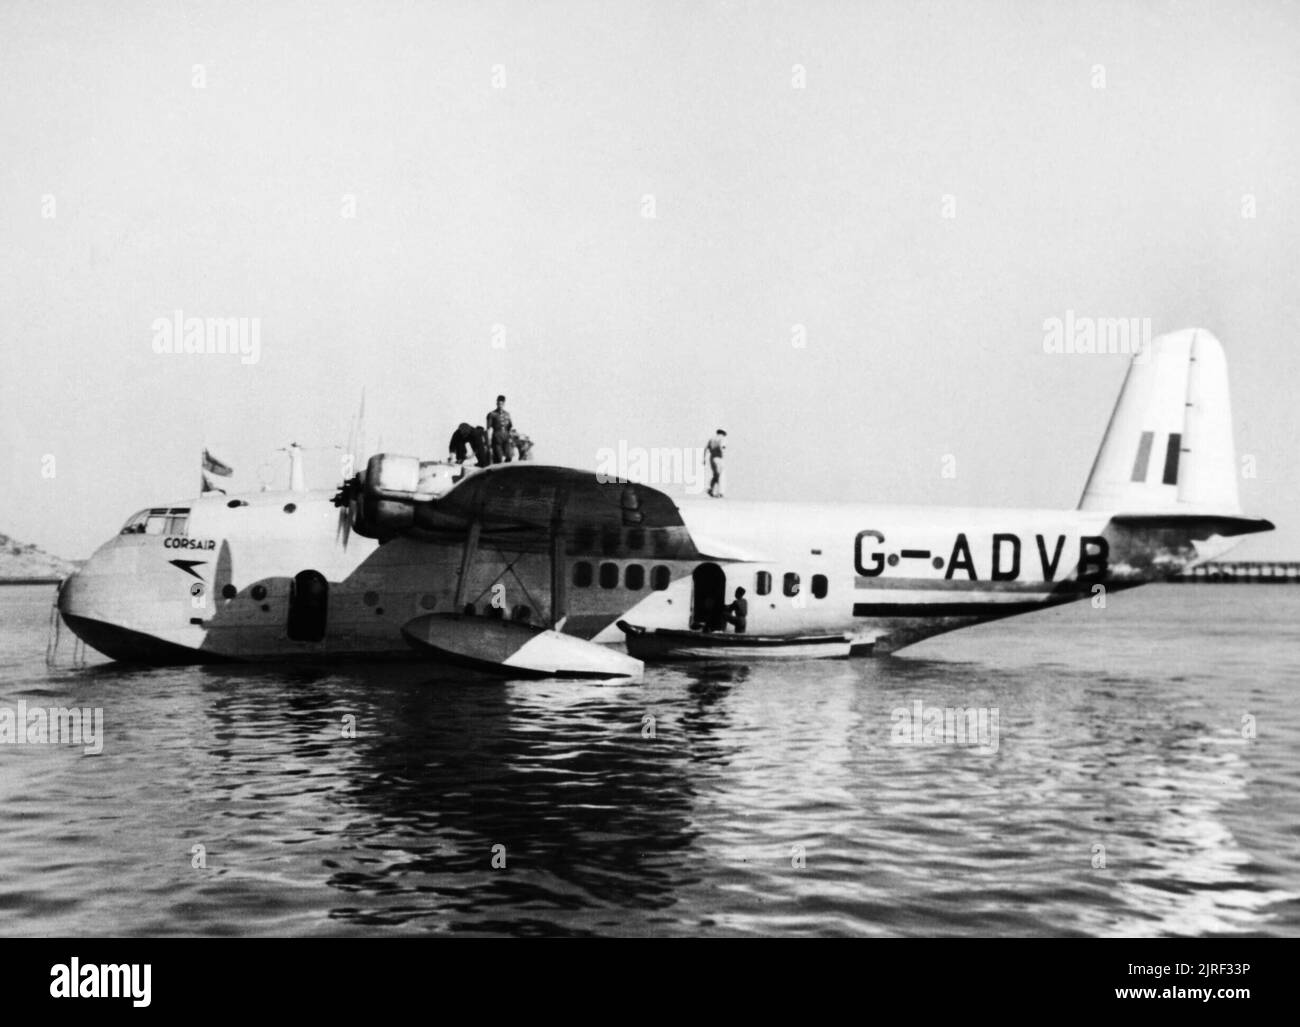 British Overseas Airways Corporation and QANTAS, 1940-1945. Short S.30 Empire ('C' Class Flying Boat), G-ADVB 'R.M.A. Corsair' moored on Lake Gwalior, India, 1941-43. Stock Photo